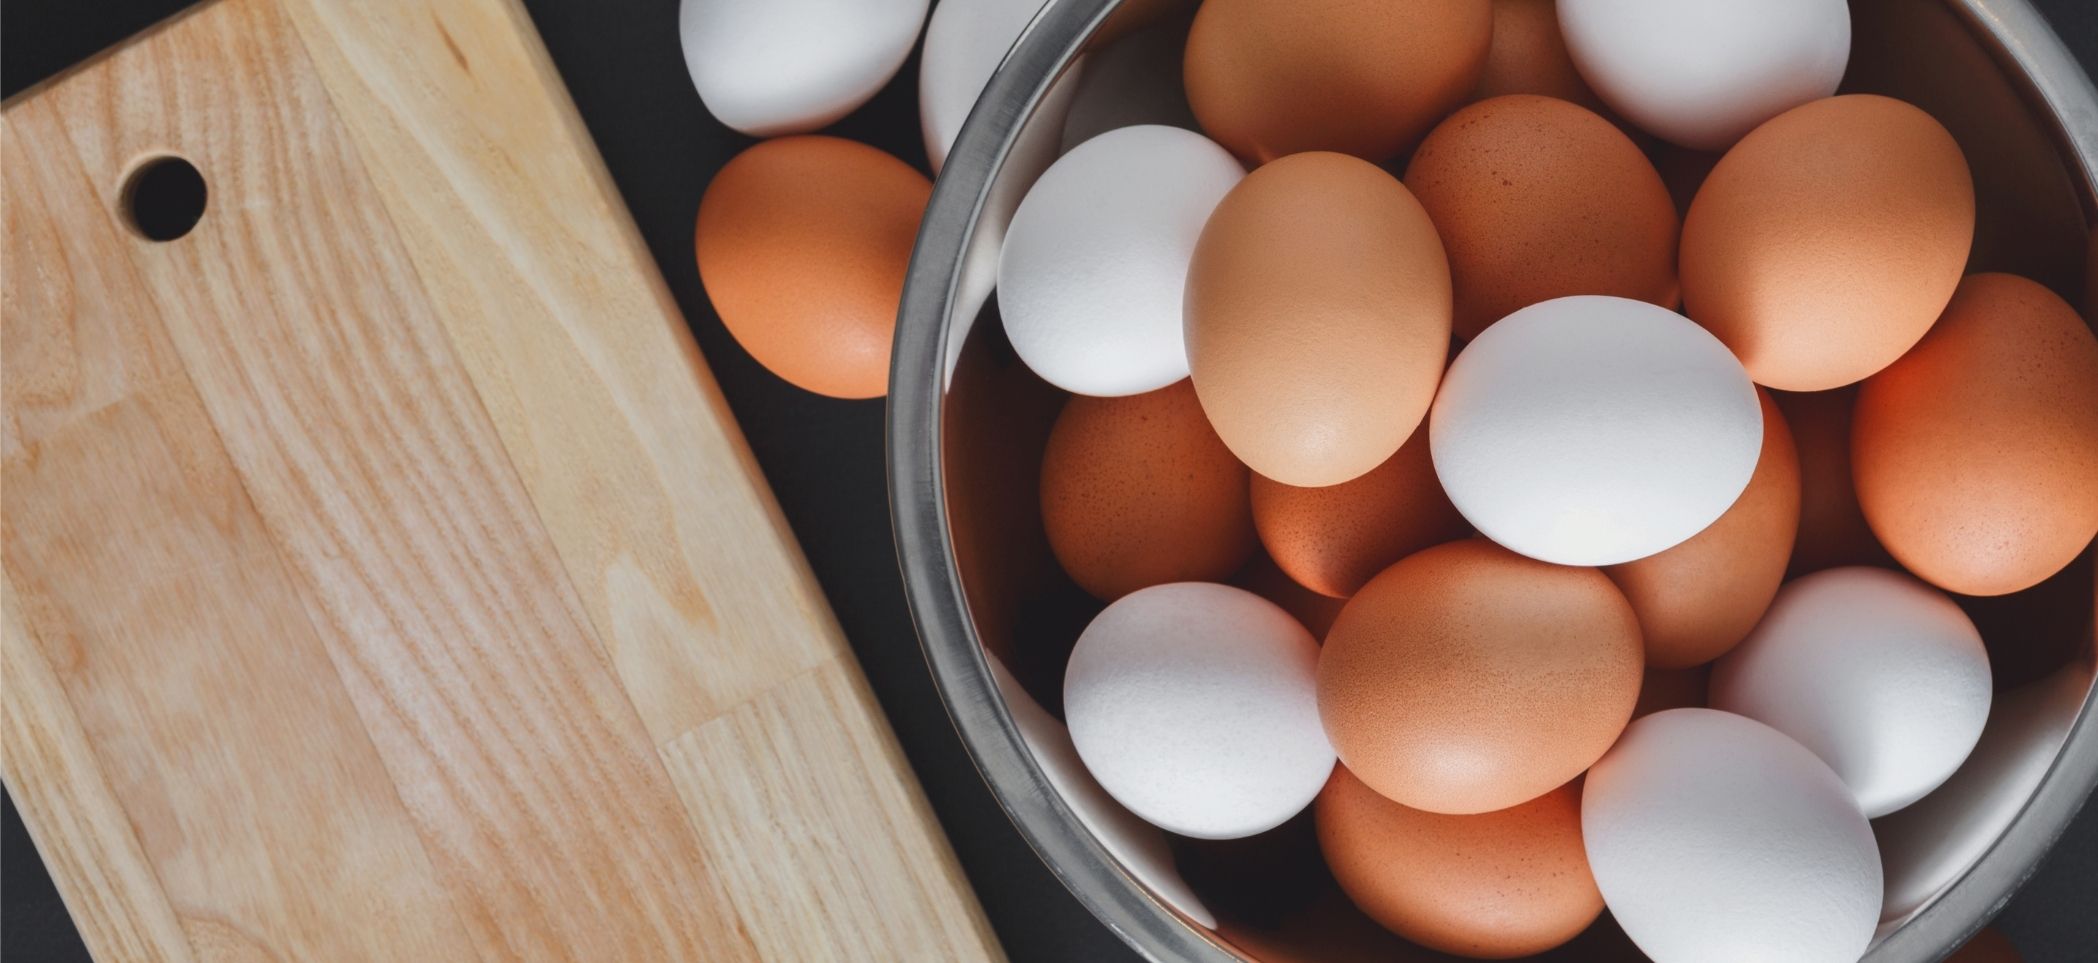 brown and white eggs in a bowl next to a cutting board